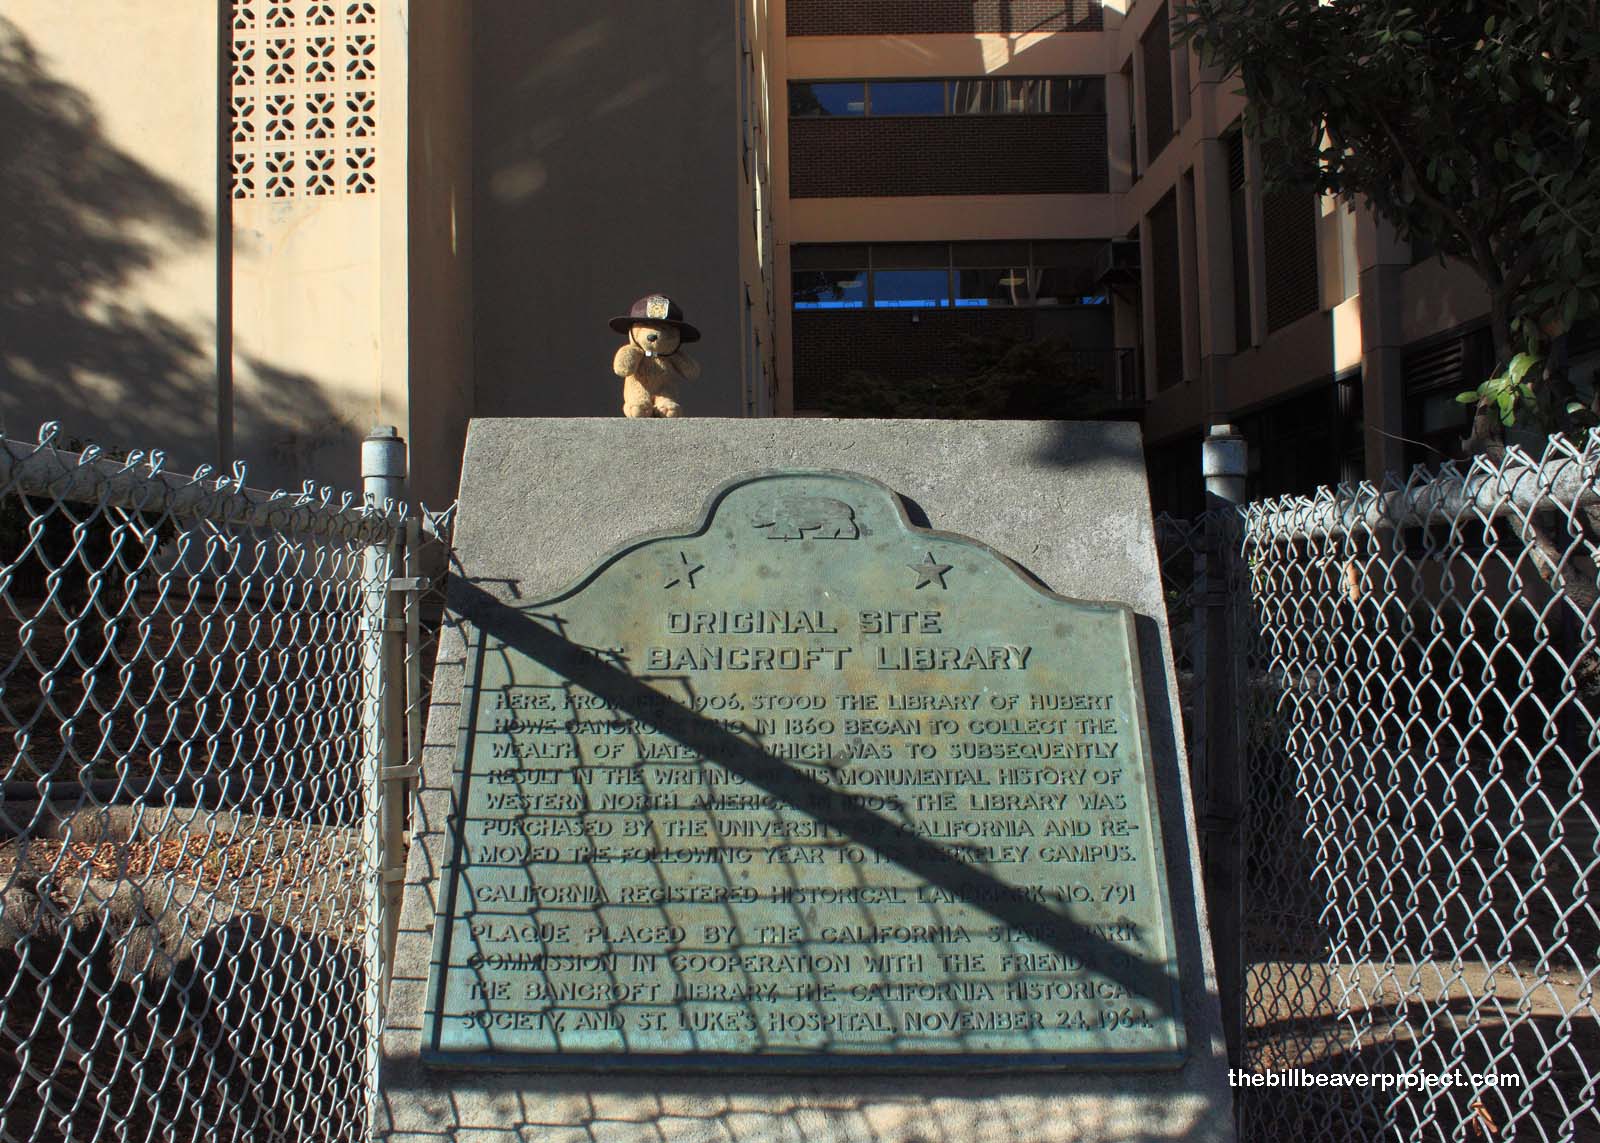 Original Site of the Bancroft Library